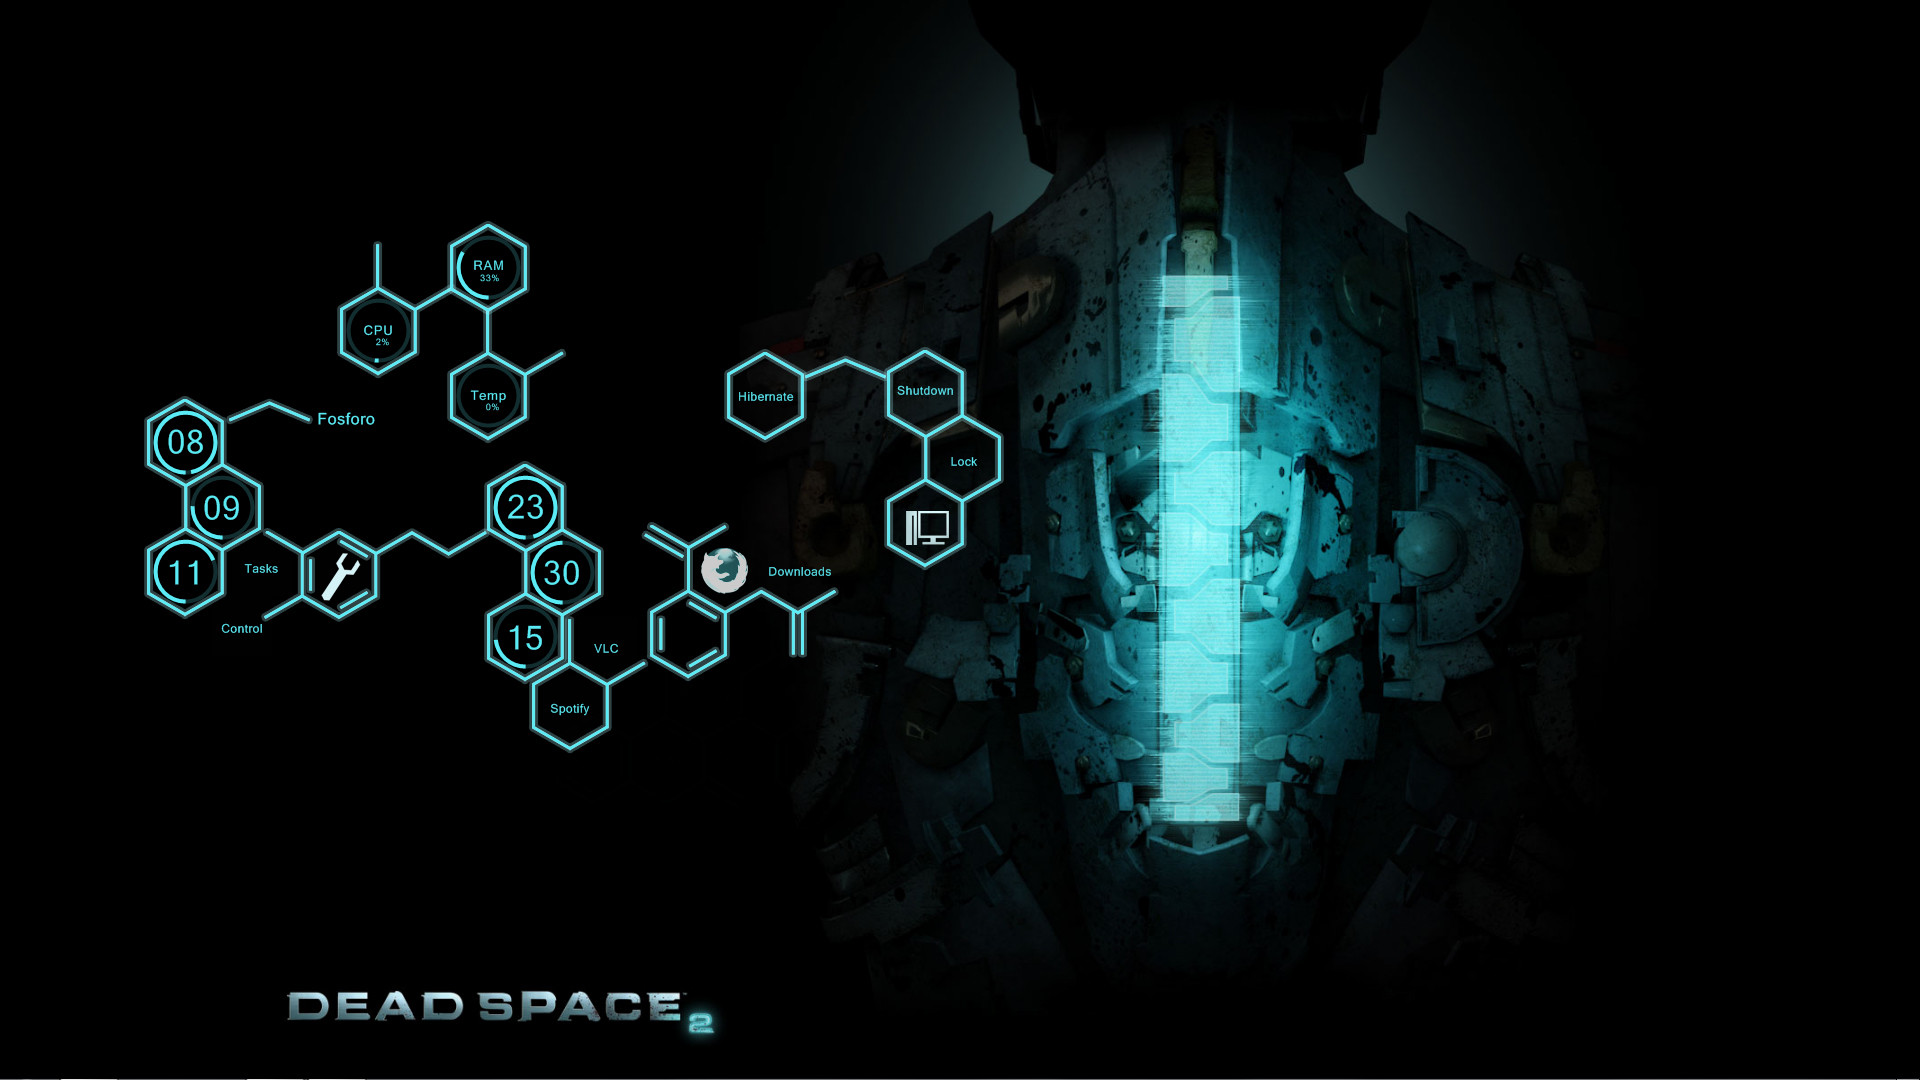 234 Dead Space Hd Wallpapers Backgrounds Wallpaper Abyss Hd Wallpapers 1920x1080